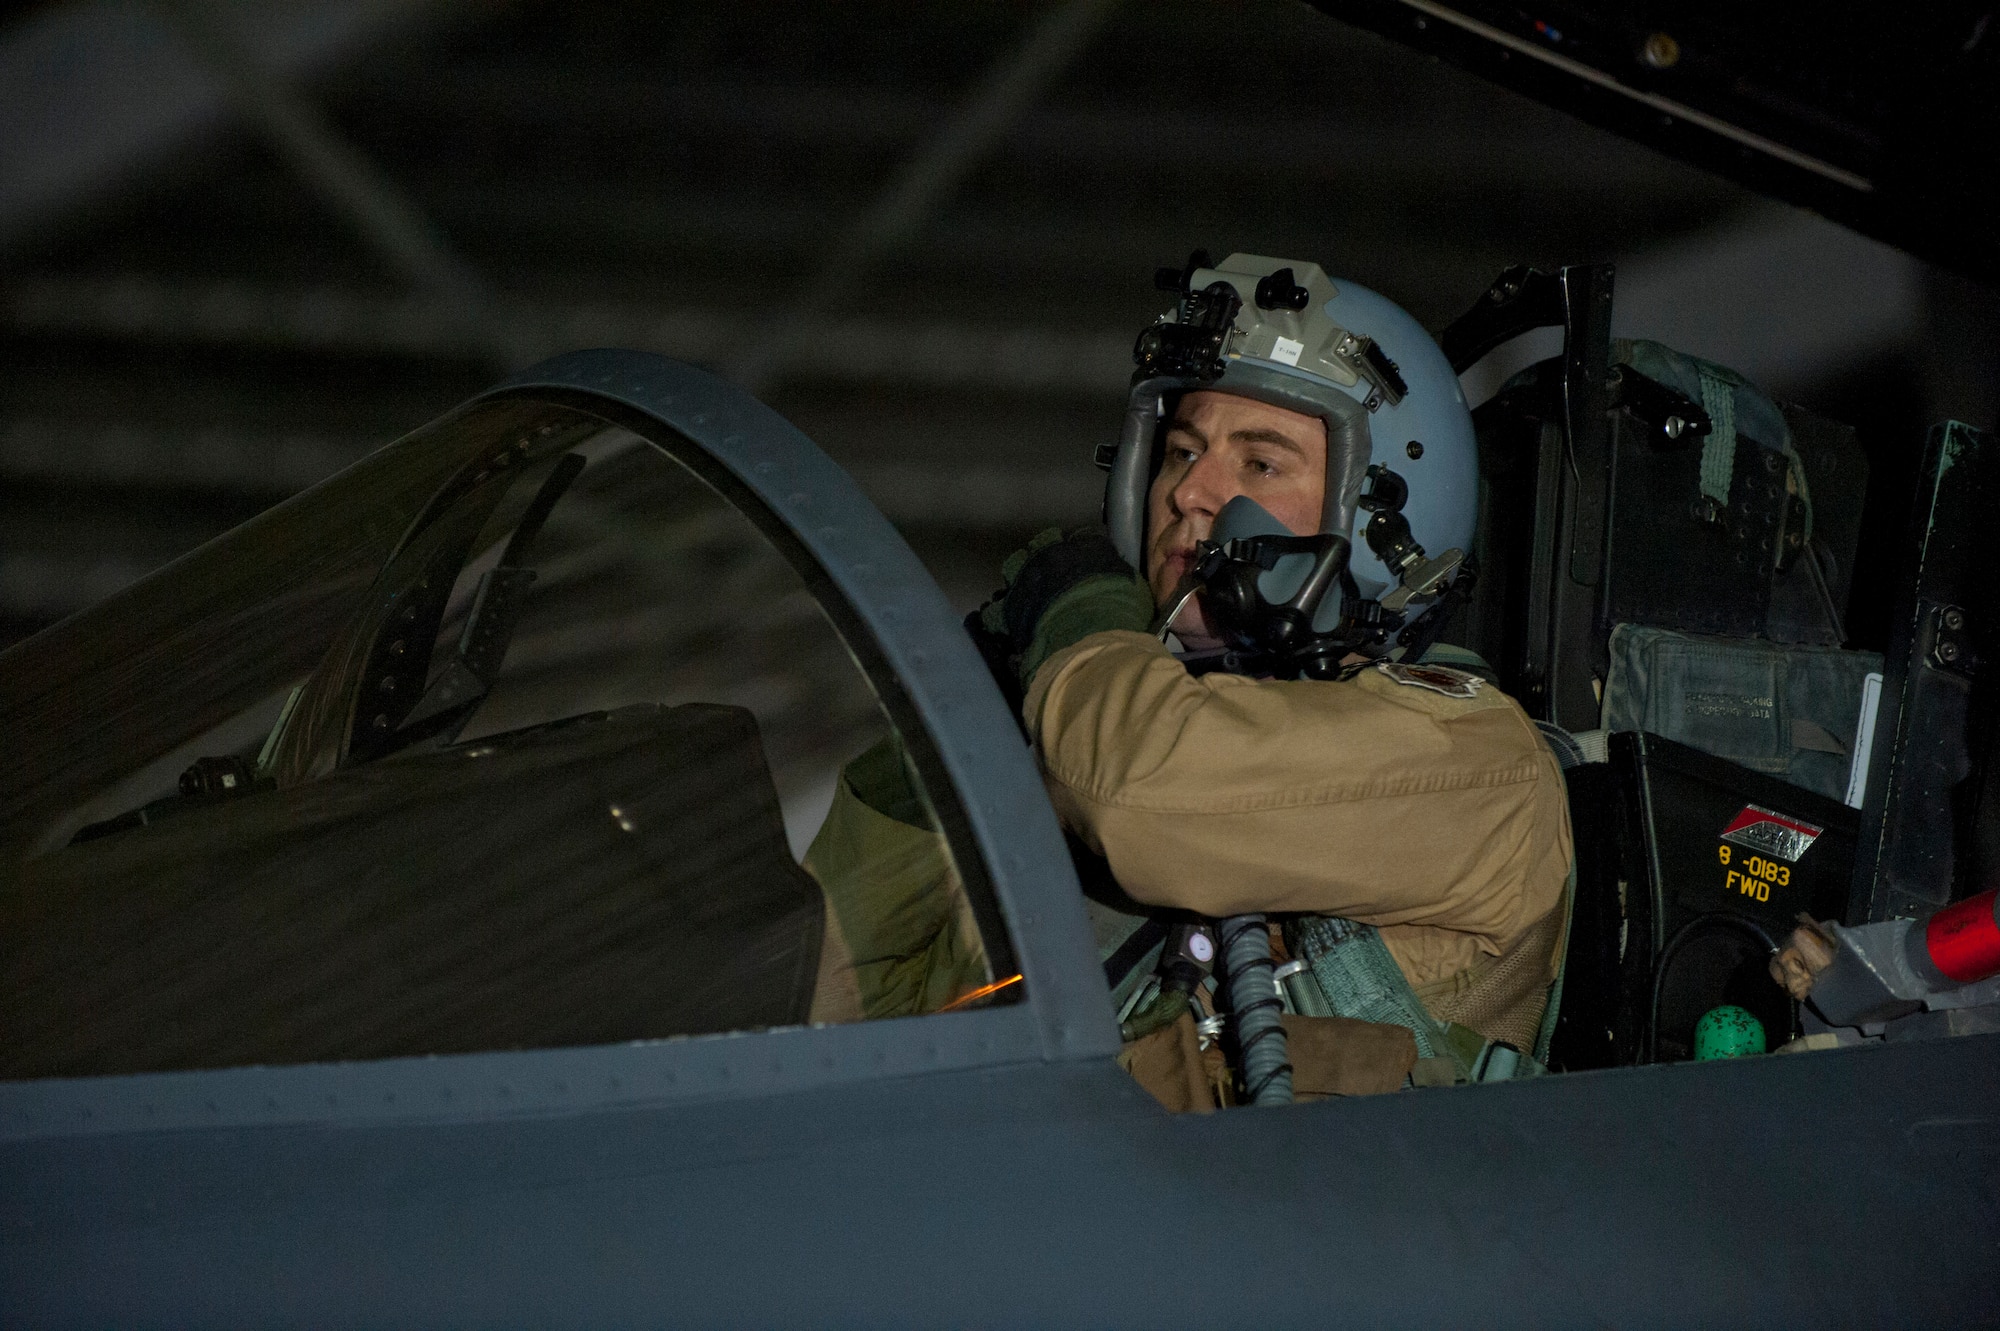 U.S. Air Force Capt. Travis Stephens, 389th Fighter Squadron assistant director of operations, adjusts his helmet at Mountain Home Air Force Base, Idaho, April 21, 2013. The 389th FS and Aircraft Maintenance Unit Airmen deployed to Southwest Asia to assist combatant commanders with combat Air Power. (U.S. Air Force photo/Staff Sgt. Roy Lynch) (Released)